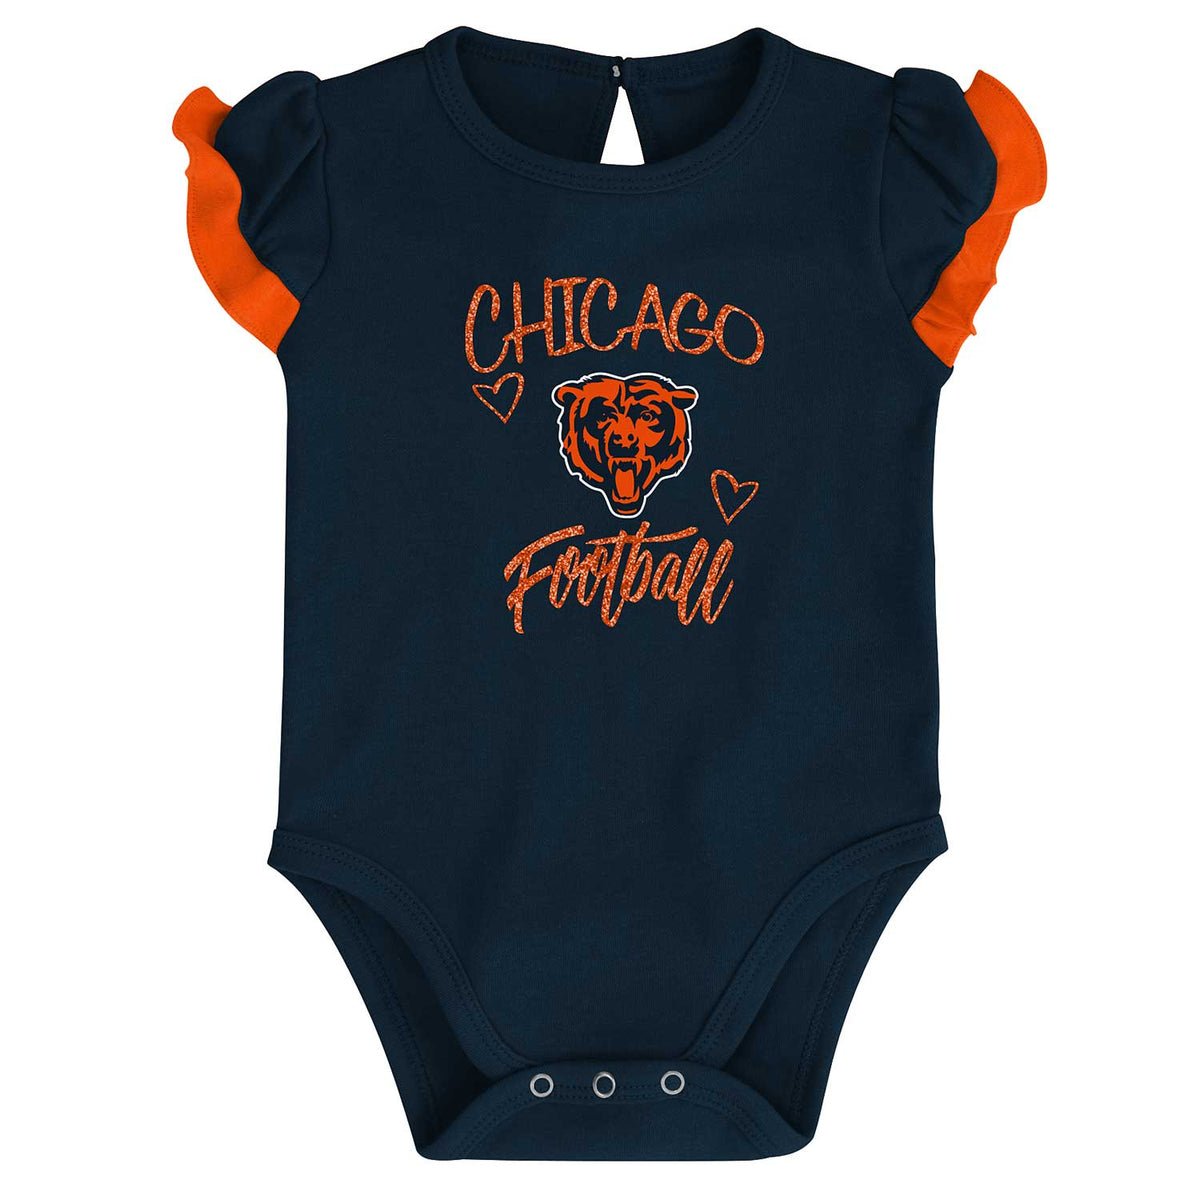 Items similar to Chicago Cubs W bodysuit or shirt on